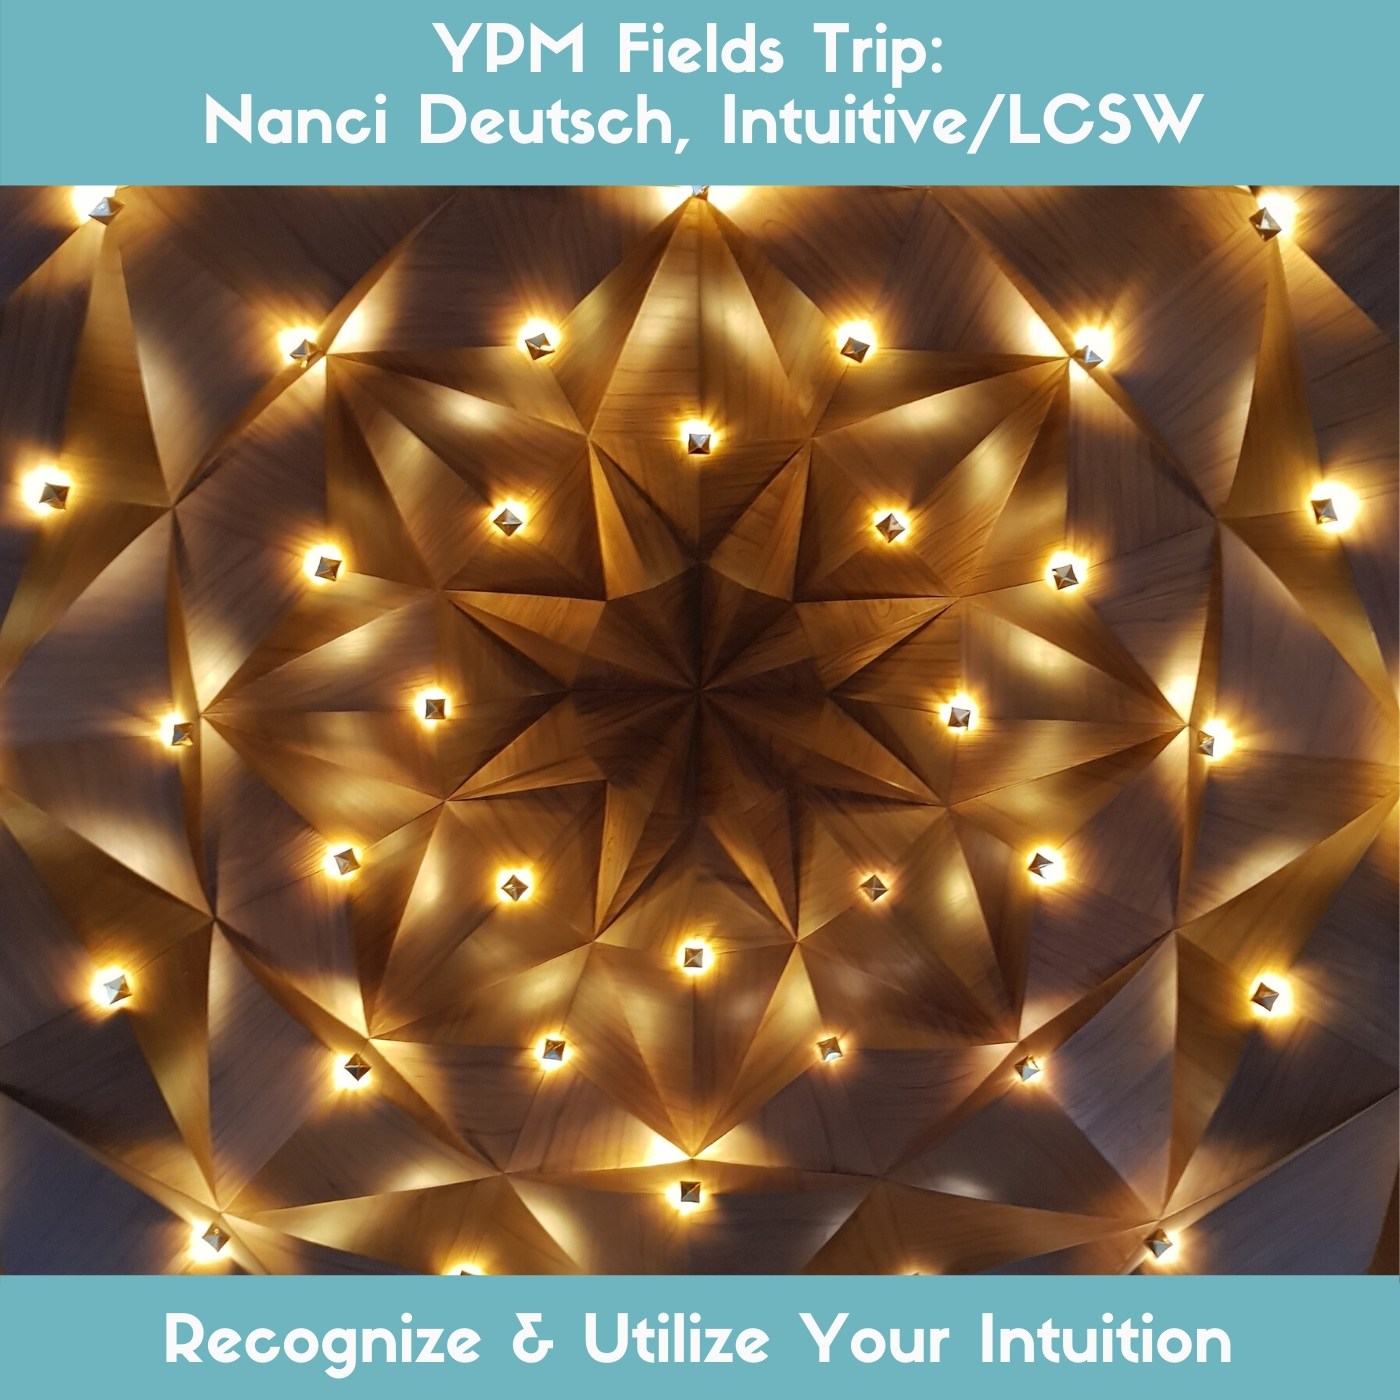 YPM Fields Trip: Recognize & Utilize Your Intuition with Nanci Deutsch, Intuitive/LCSW